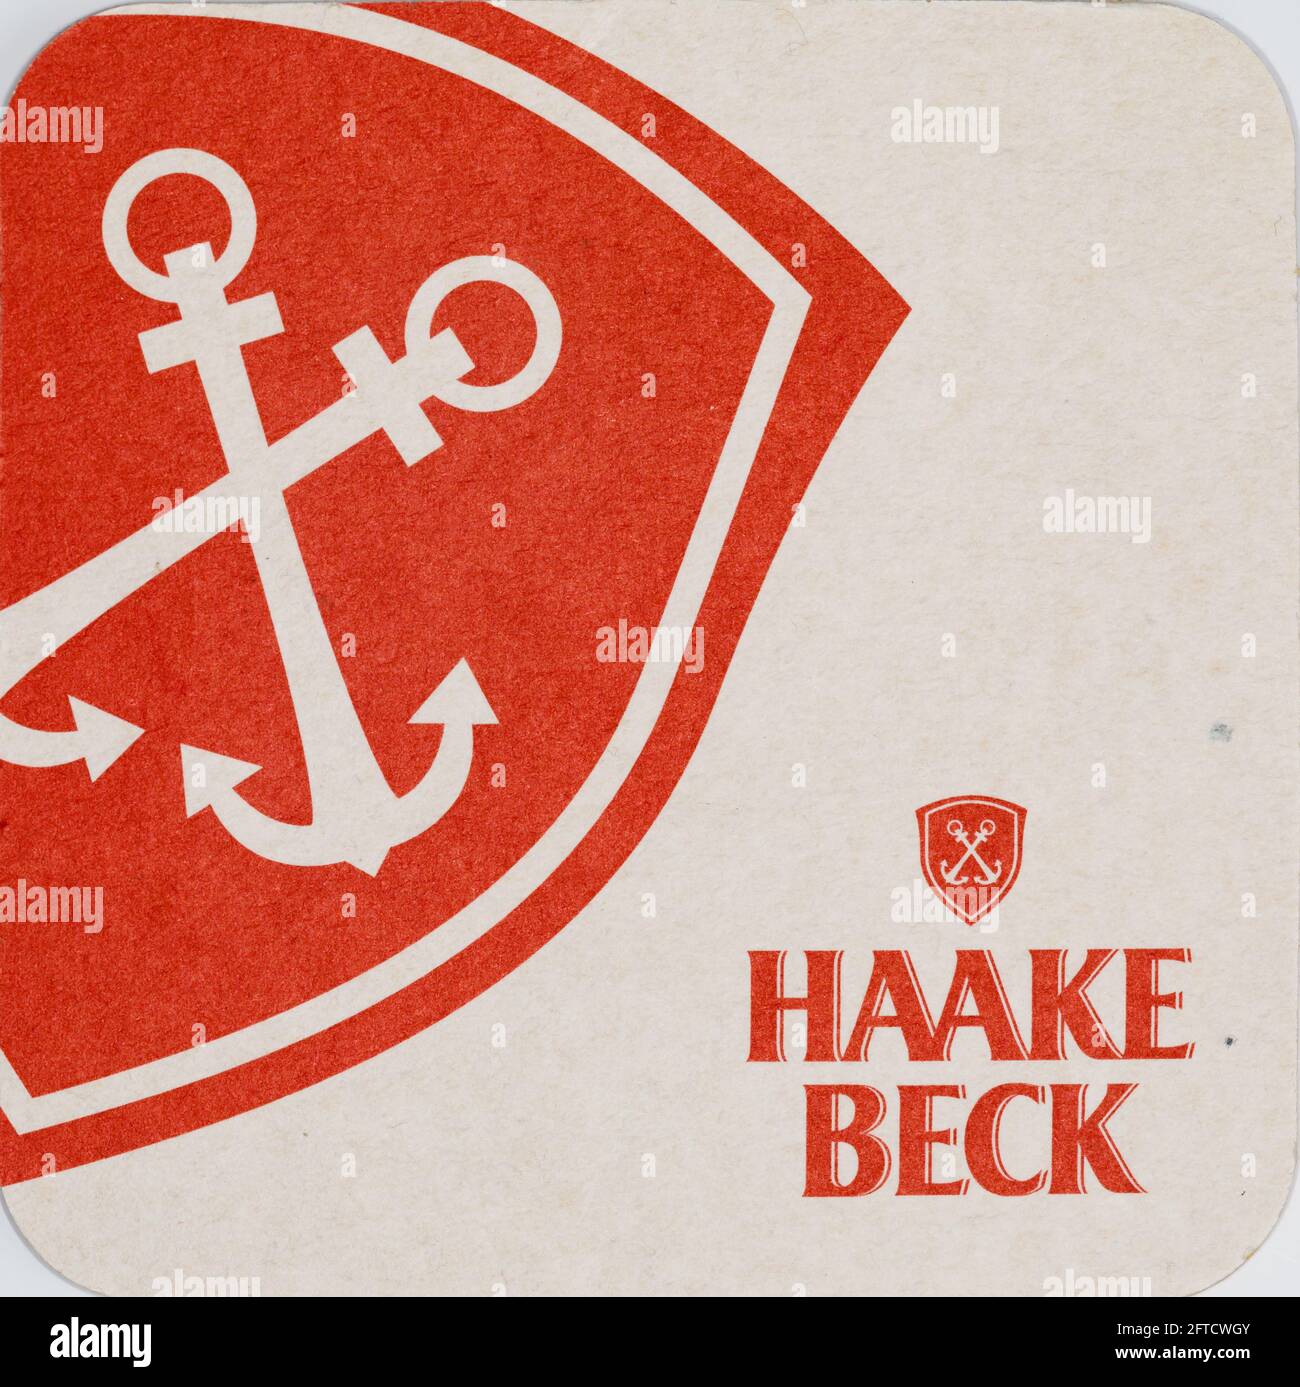 Haake Beck German brewery,  Beermat, cut out on white. Stock Photo